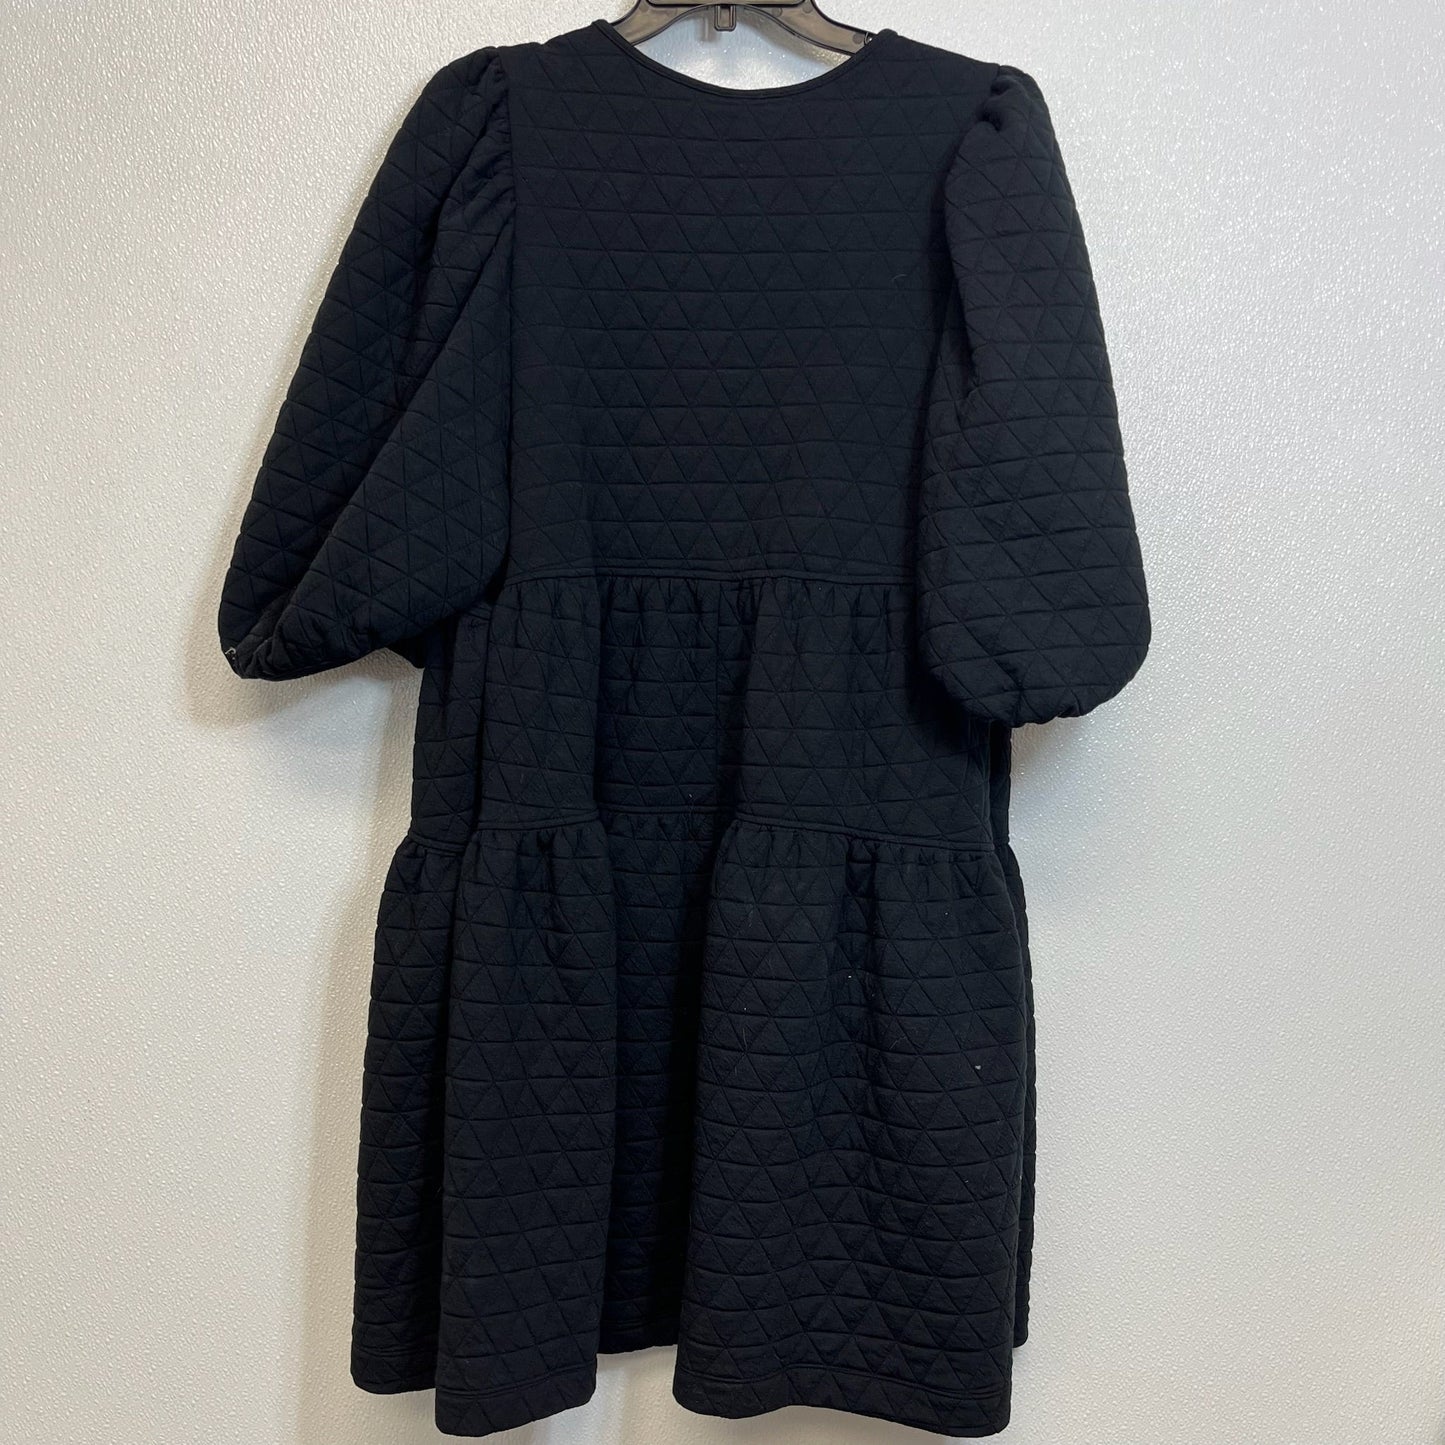 Black Dress Casual Short A New Day, Size Xxl